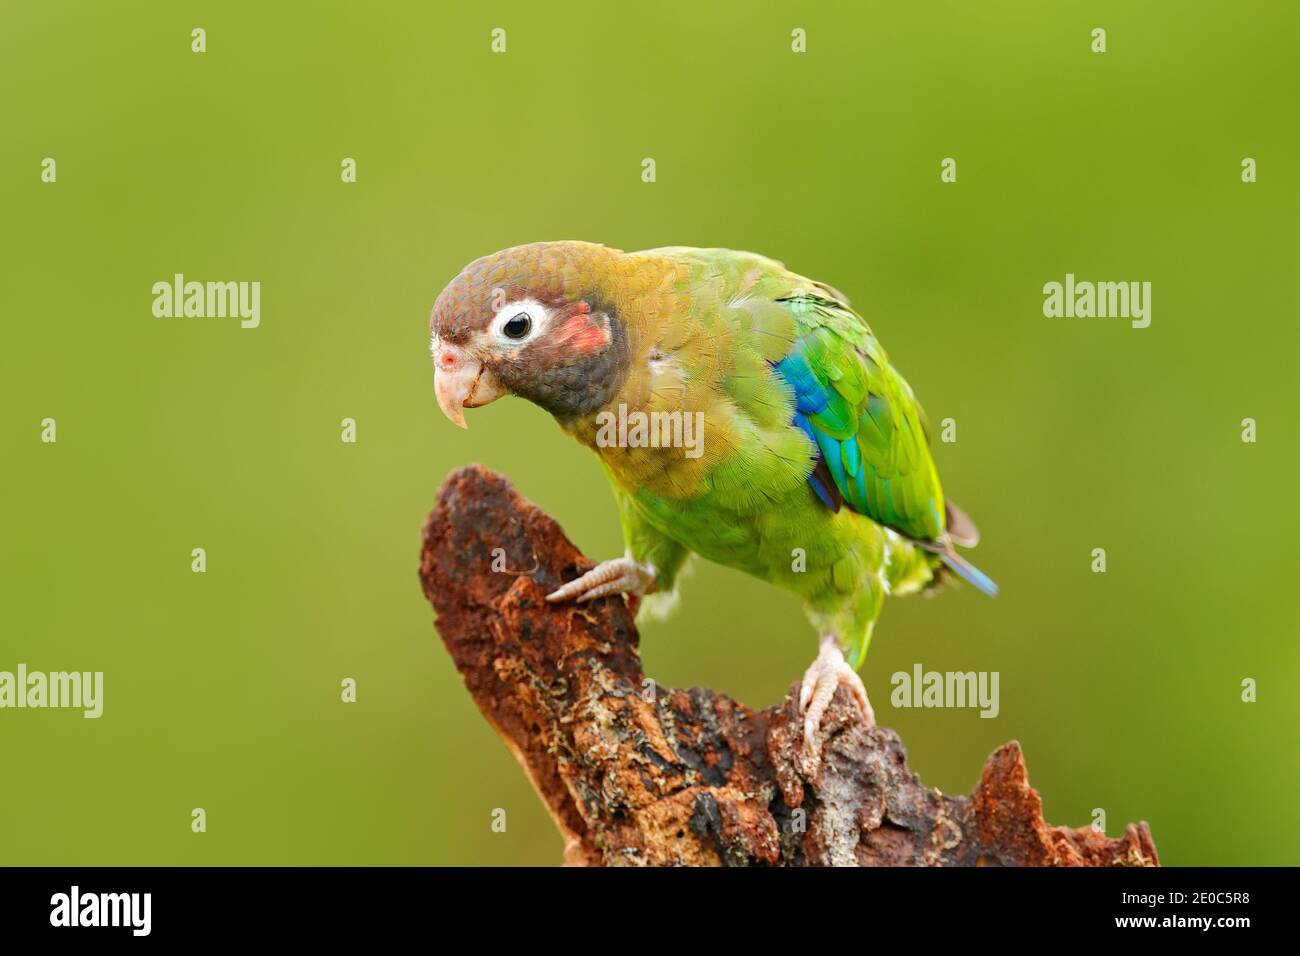 Parrot, Pionopsitta haematotis, Mexico, green parrot with brown head. Detail close-up portrait of bird from Central America. Wildlife scene from tropi Stock Photo